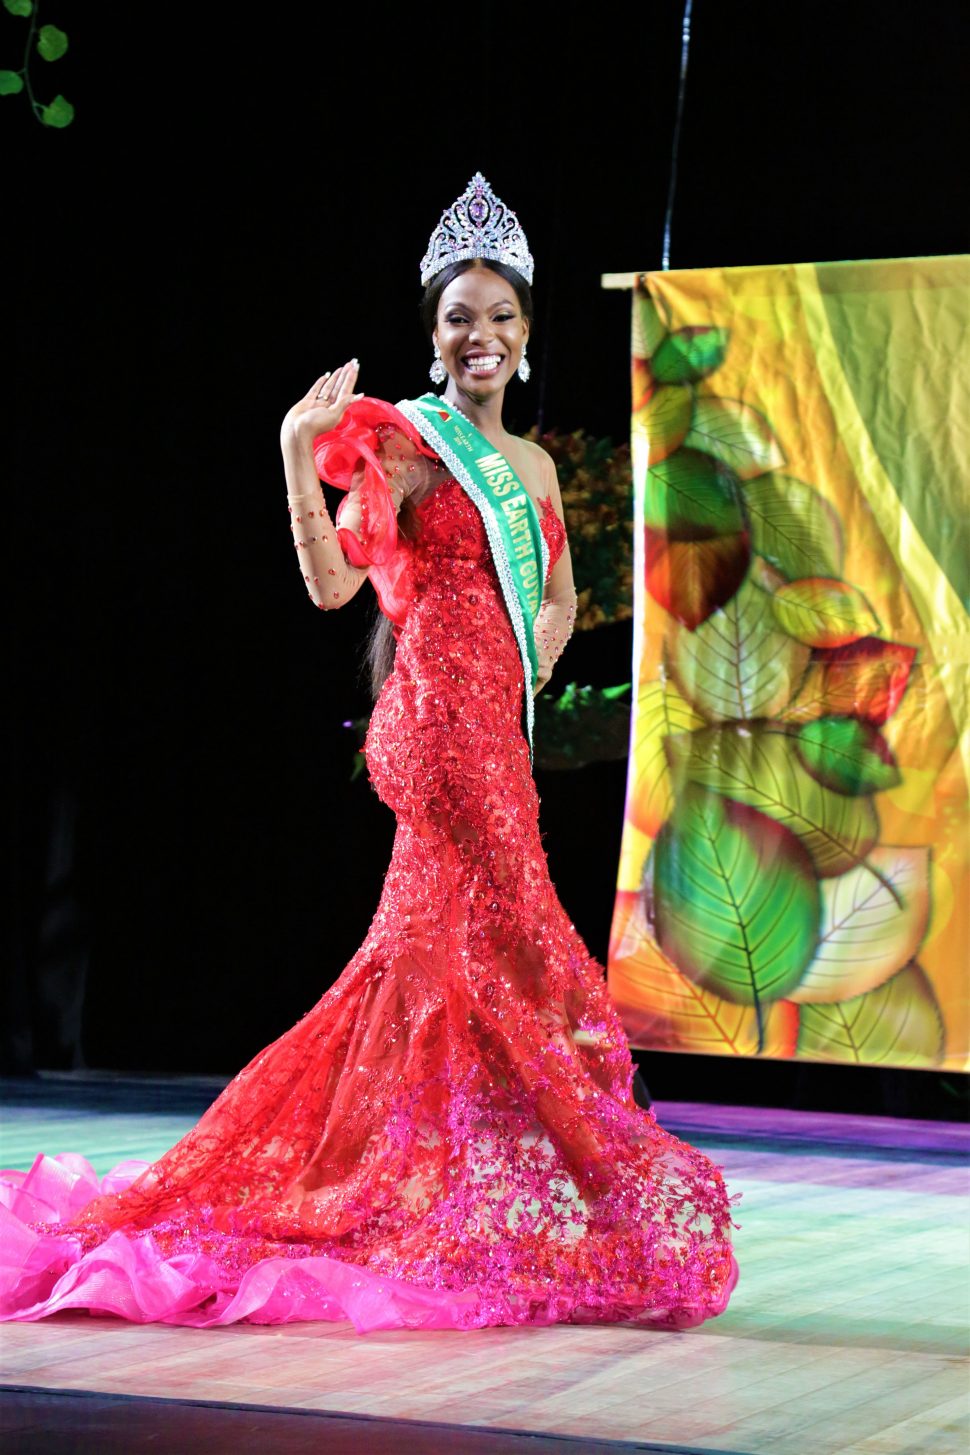 Faydeha takes her first walk as Miss Earth Guyana 2019
